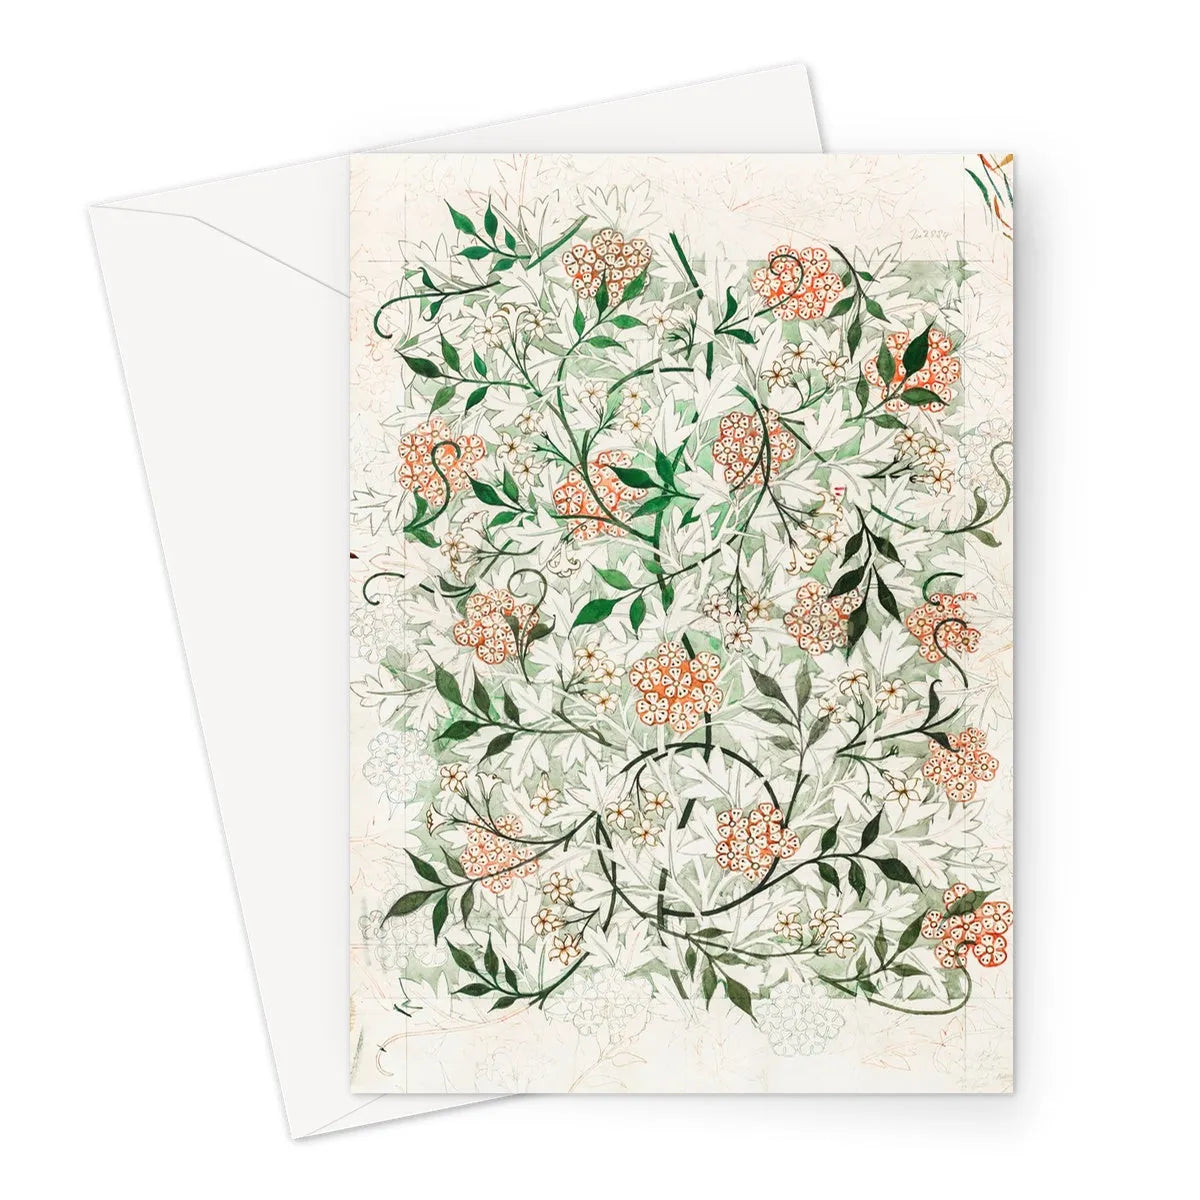 Jasmine By William Morris Greeting Card - A5 Portrait / 10 Cards - Greeting & Note Cards - Aesthetic Art